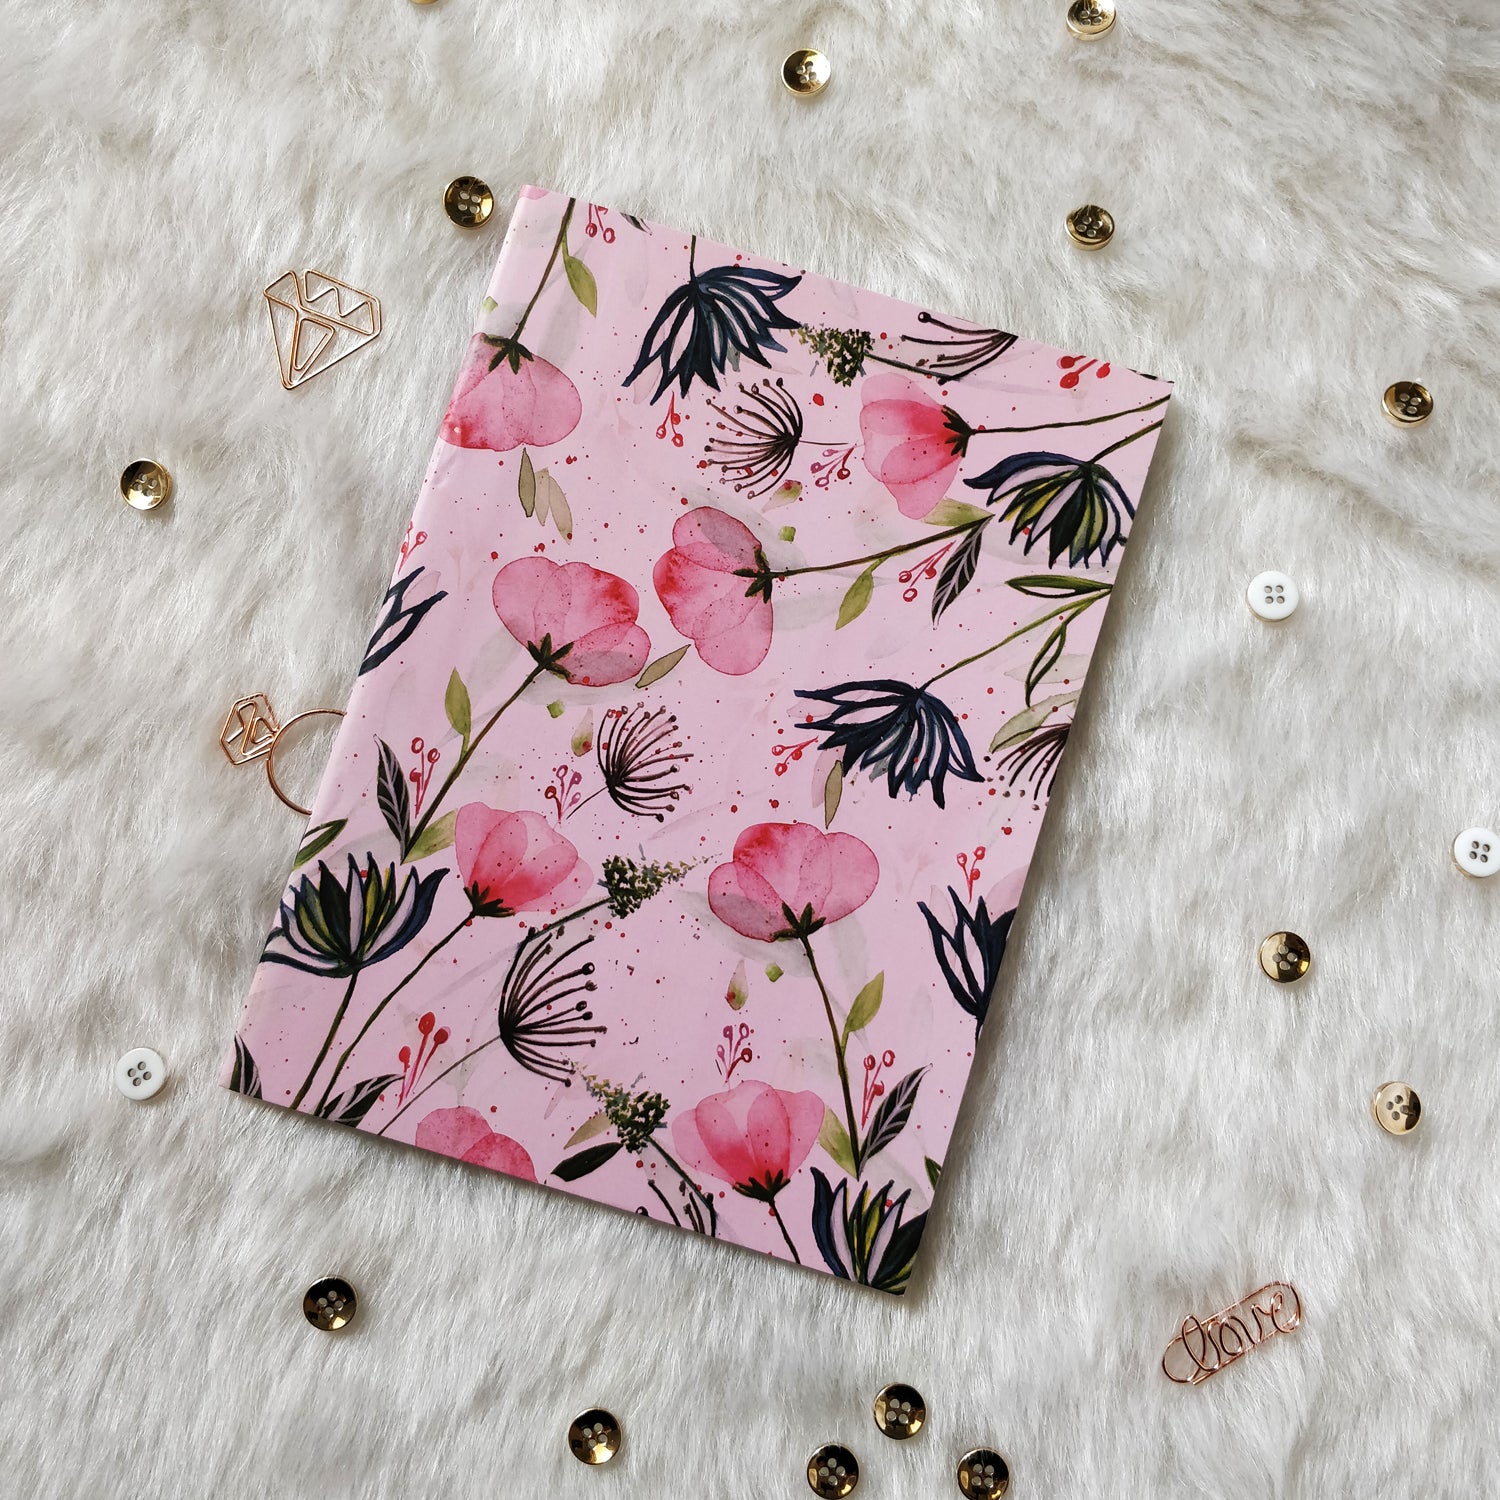 Nautankishaala - Pink Floral A5 Notebook | Unruled Notebook For Doodle Online in India